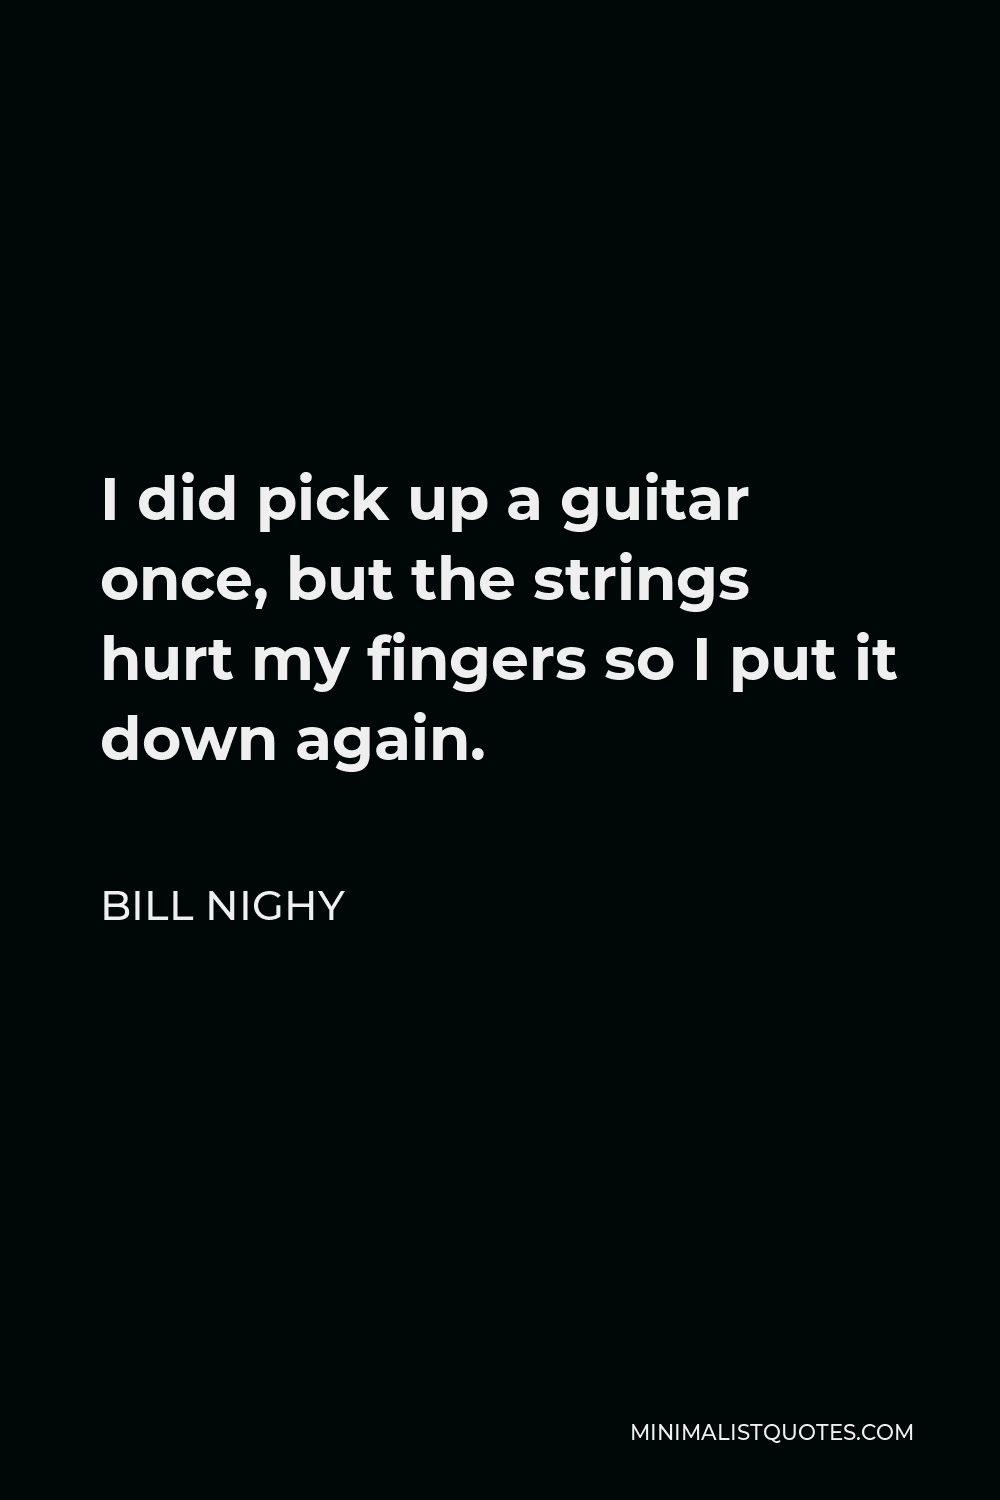 Bill Nighy Quote - I did pick up a guitar once, but the strings hurt my fingers so I put it down again.